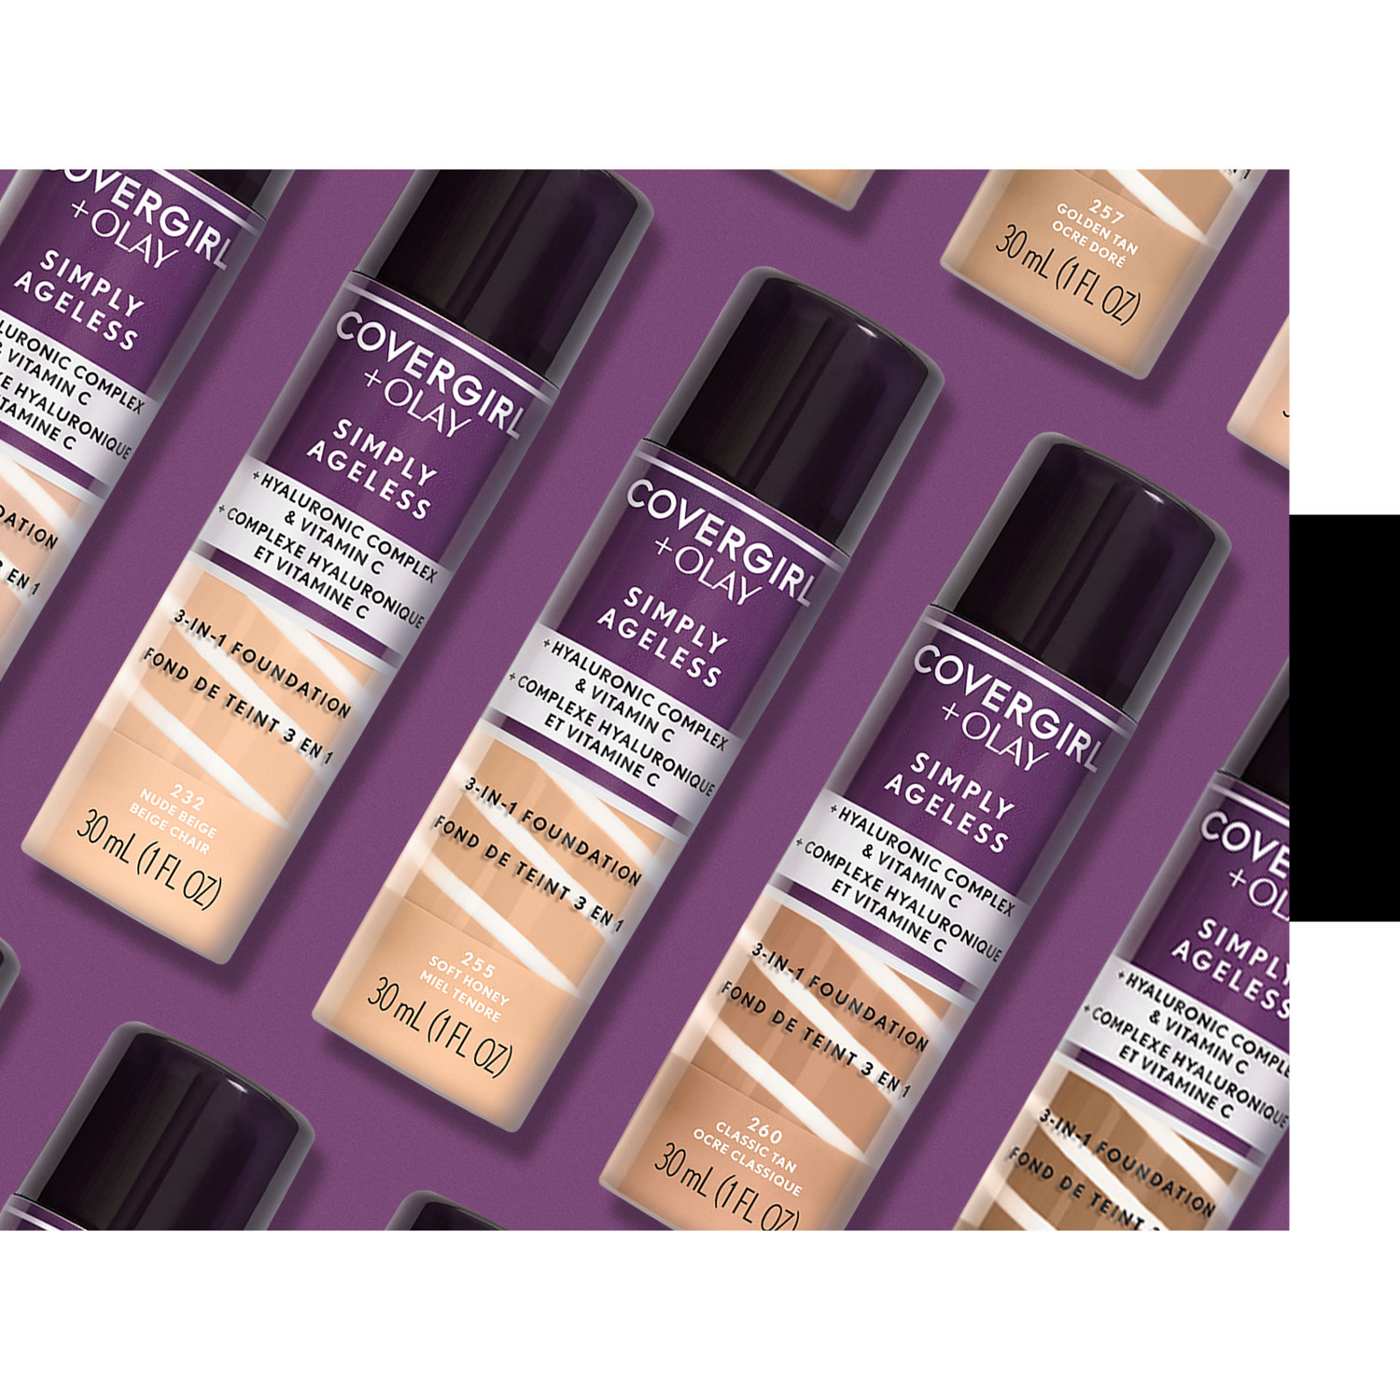 Covergirl Simply Ageless 3-in-1 Liquid Foundation 240 Natural Beige; image 4 of 6